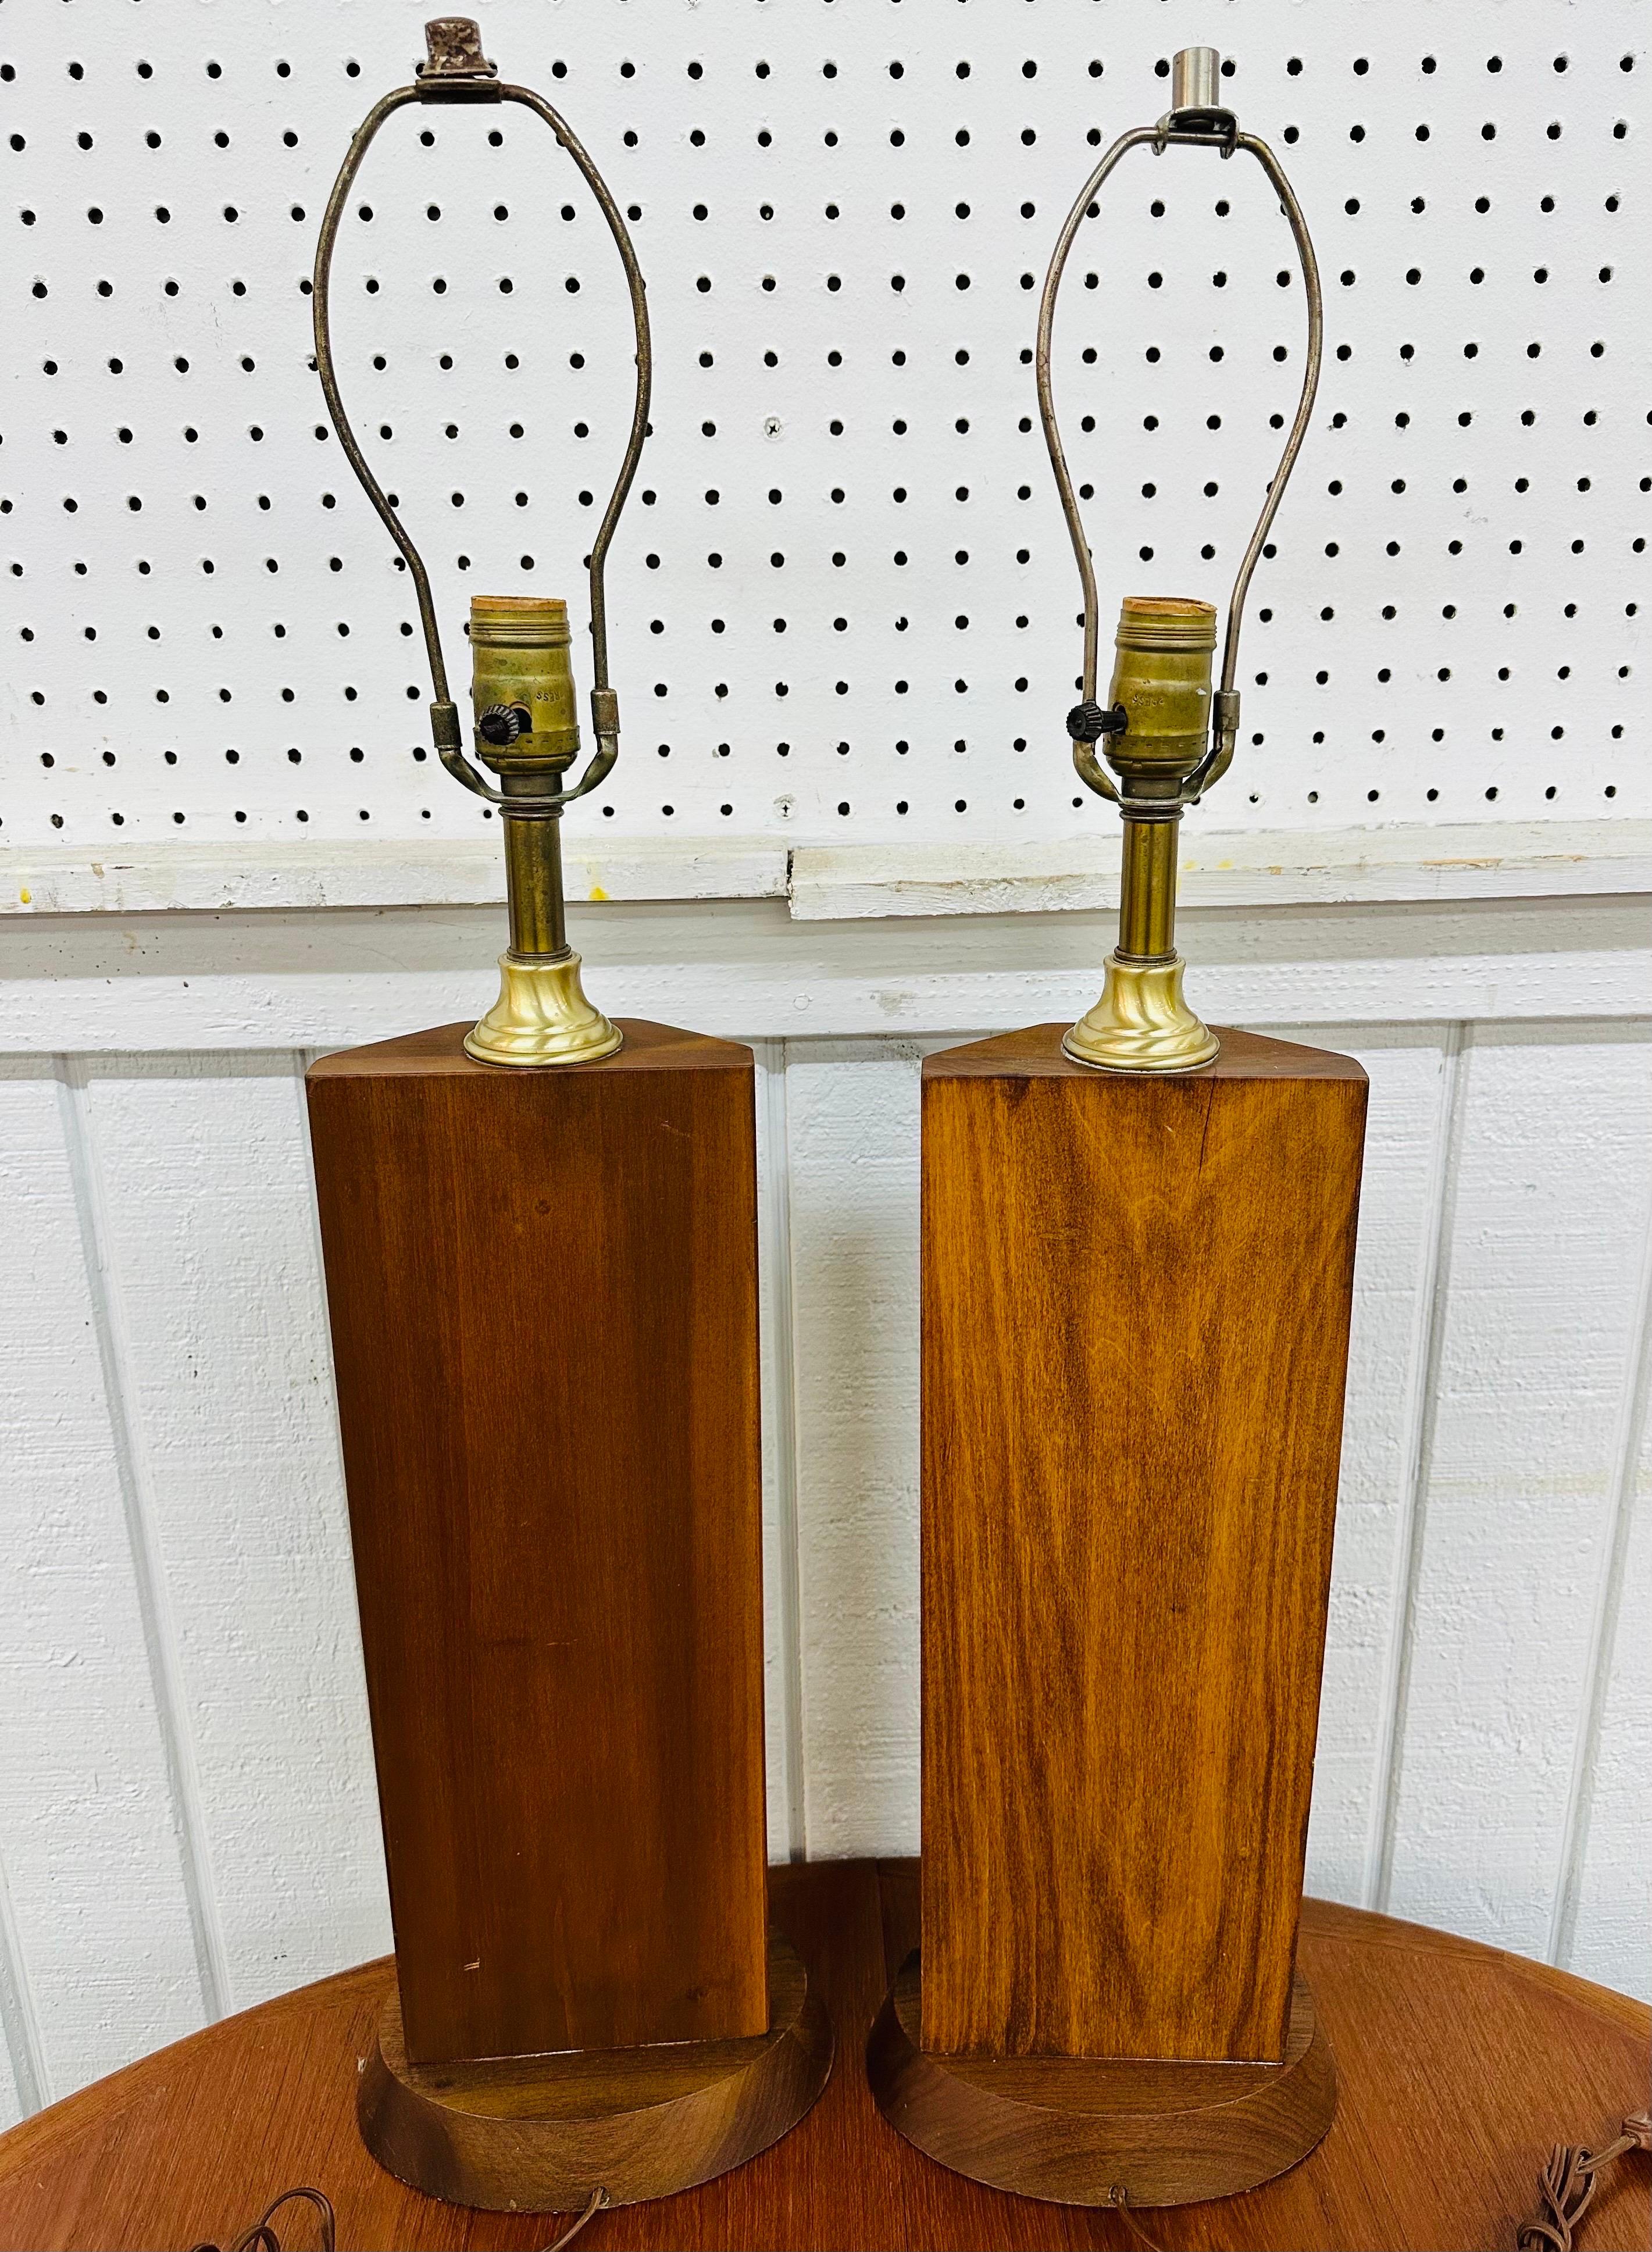 American Mid-Century Modern Walnut Stained Glass Table Lamps - Set of 2 For Sale